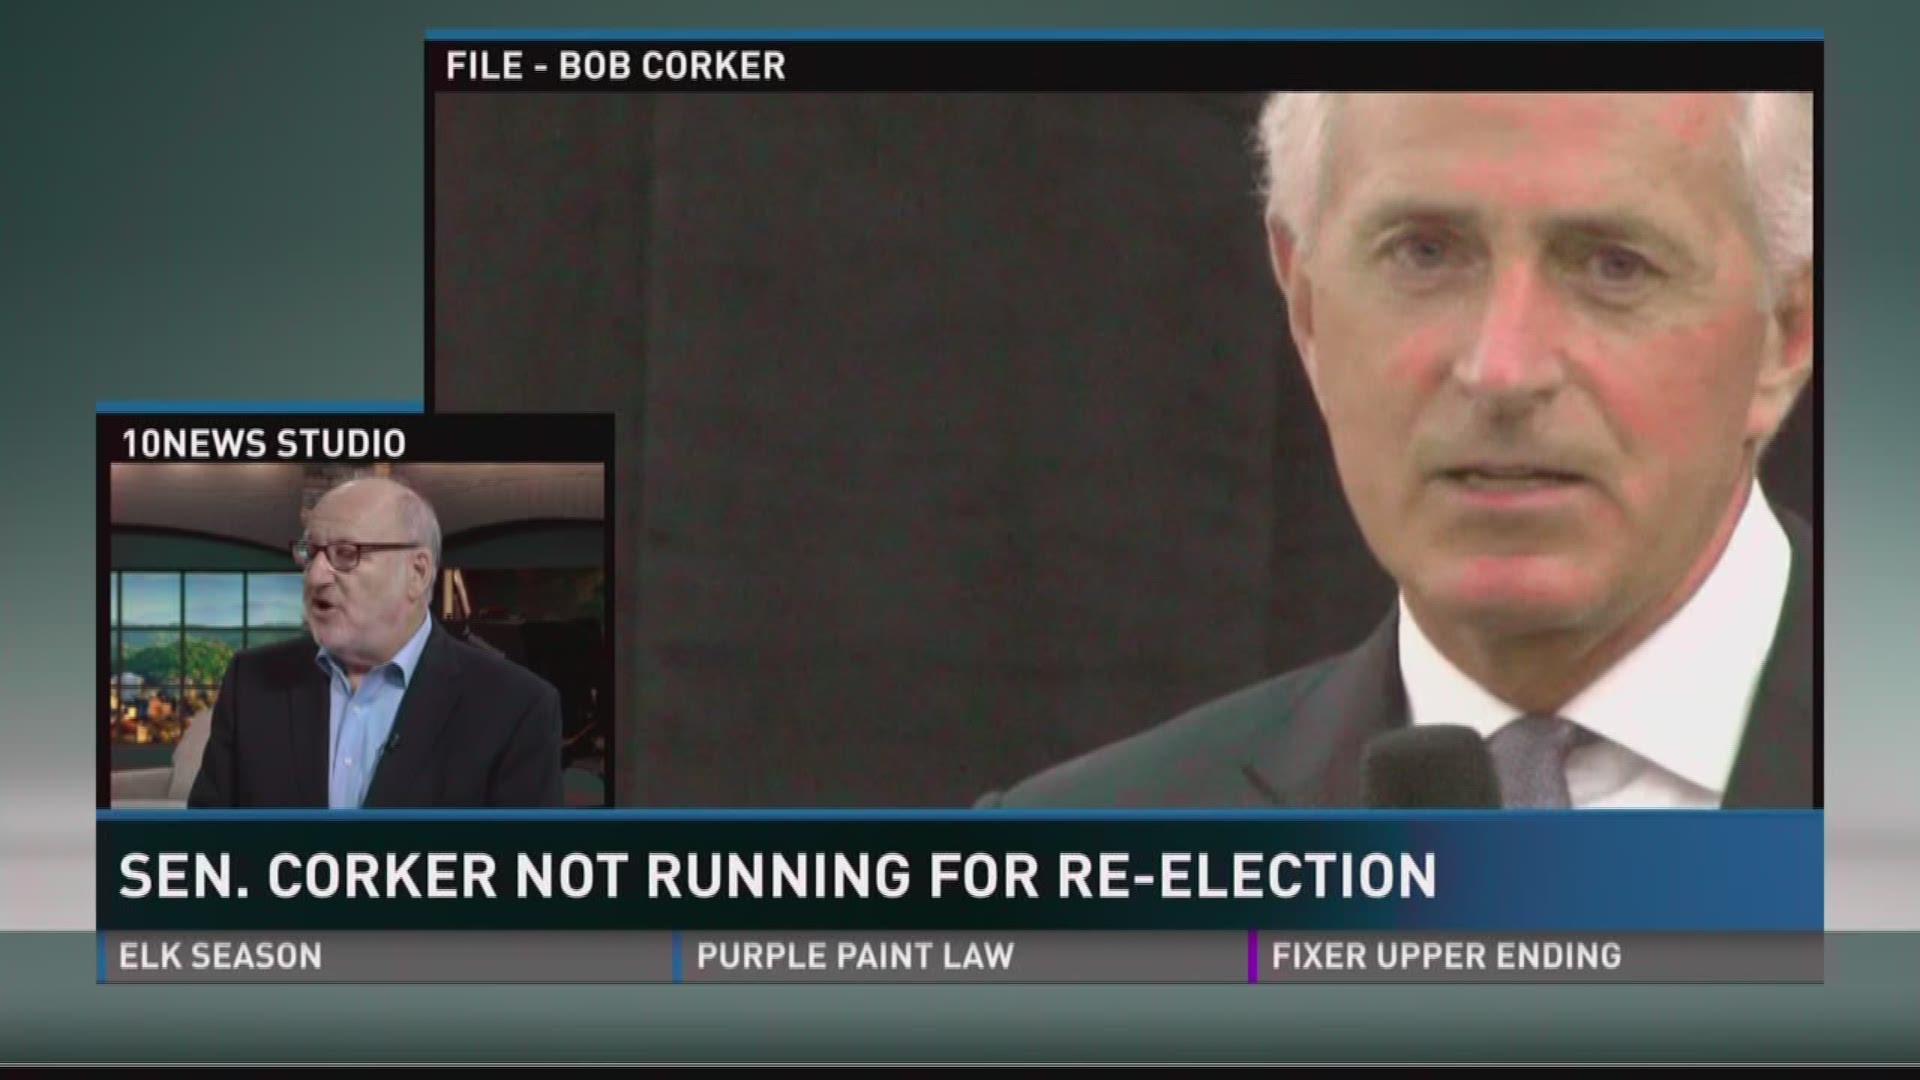 After more than 10 years serving Tennessee in the U-S Senate...Bob Corker says he will *not seek re-election. Joining us now with a look at Corker's career is Inside Tennessee panelist and Republican Mike Cohen.